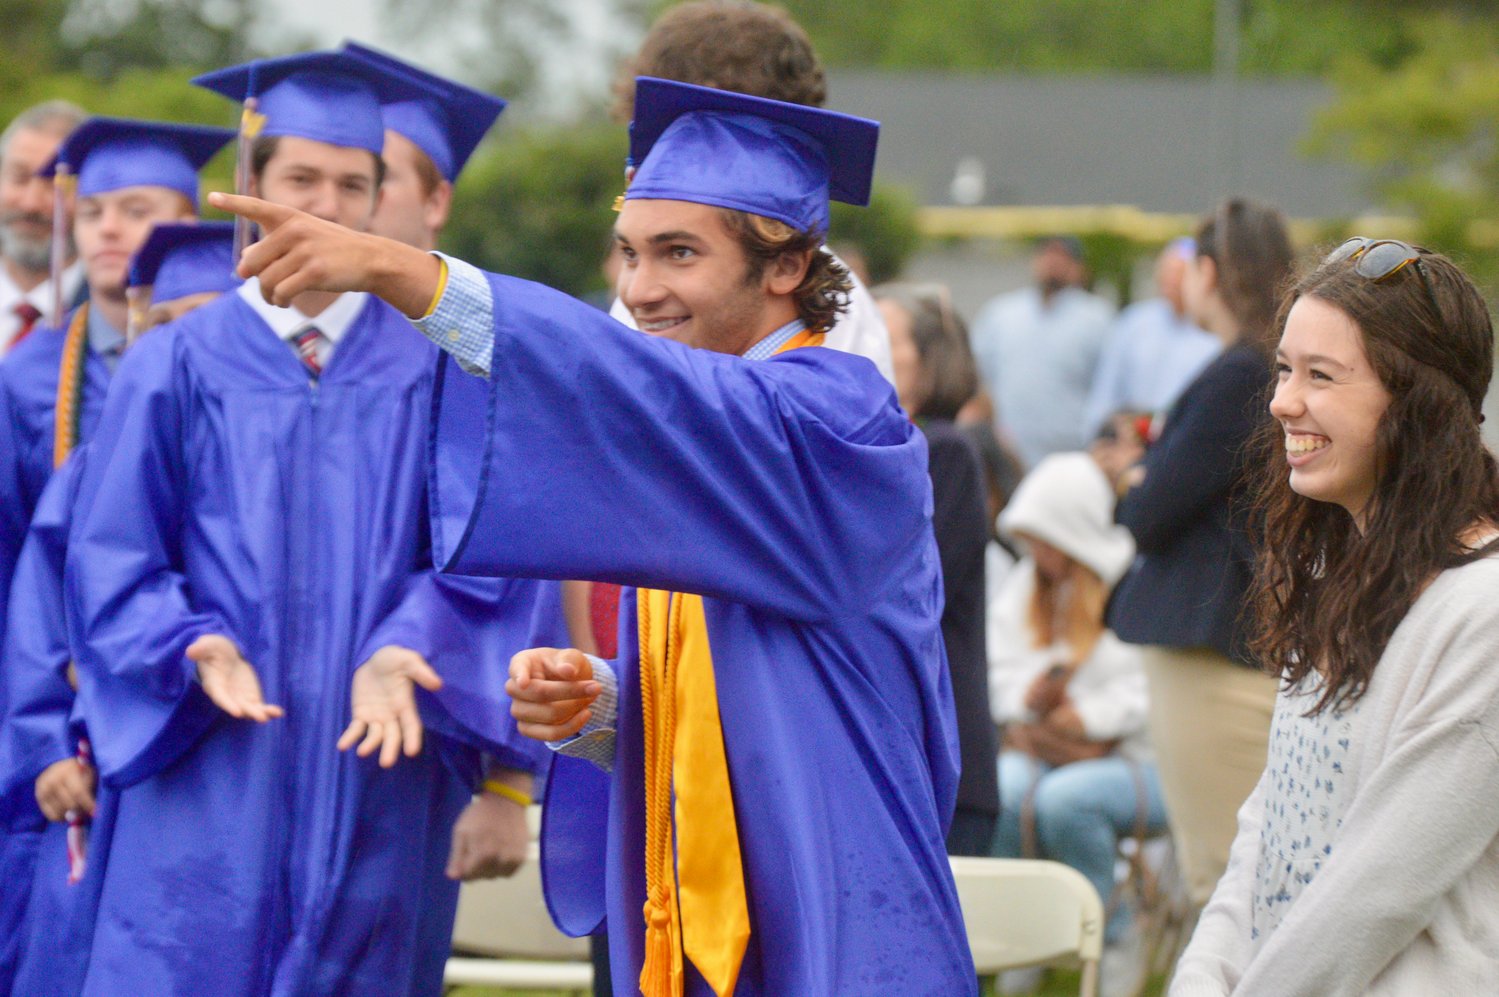 Sam Stamoulis points to the stage before walking up to collect his diploma.